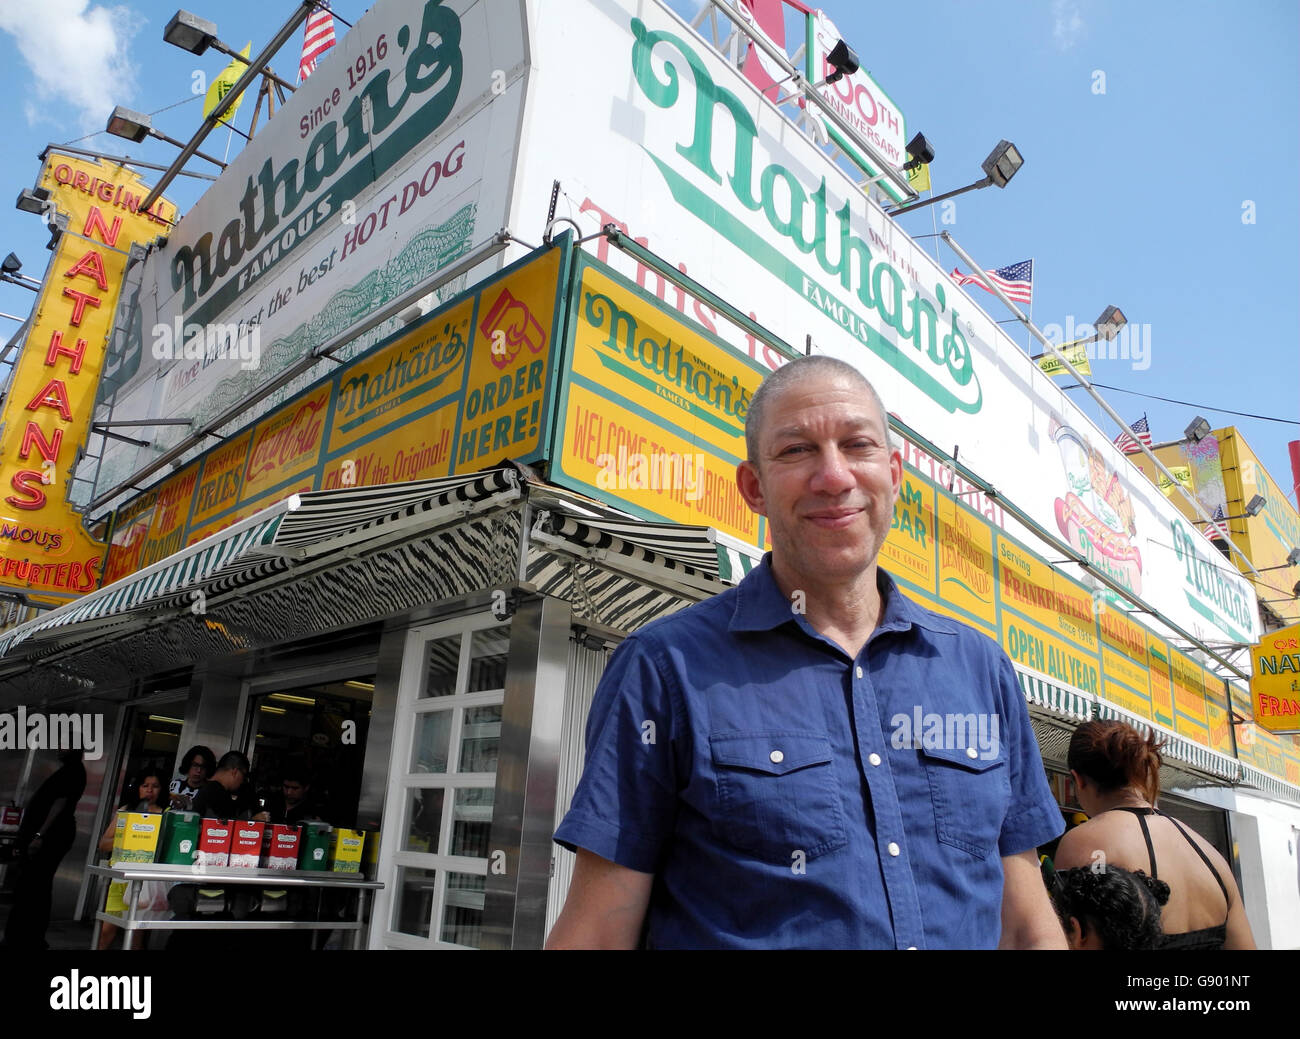 New York, US. 29th June, 2016. Lloyd Handwerker, grandson of Nathan Handwerker, founder of 'Nathan's', standing in front of 'Nathan's' restaurant in Coney Island in New York, US, 29 June 2016. The restaurant famous for simple fast food snack celebrates its 100th anniversary this year. PHOTO: JOHANNES SCHMITT-TEGGE/dpa/Alamy Live News Stock Photo